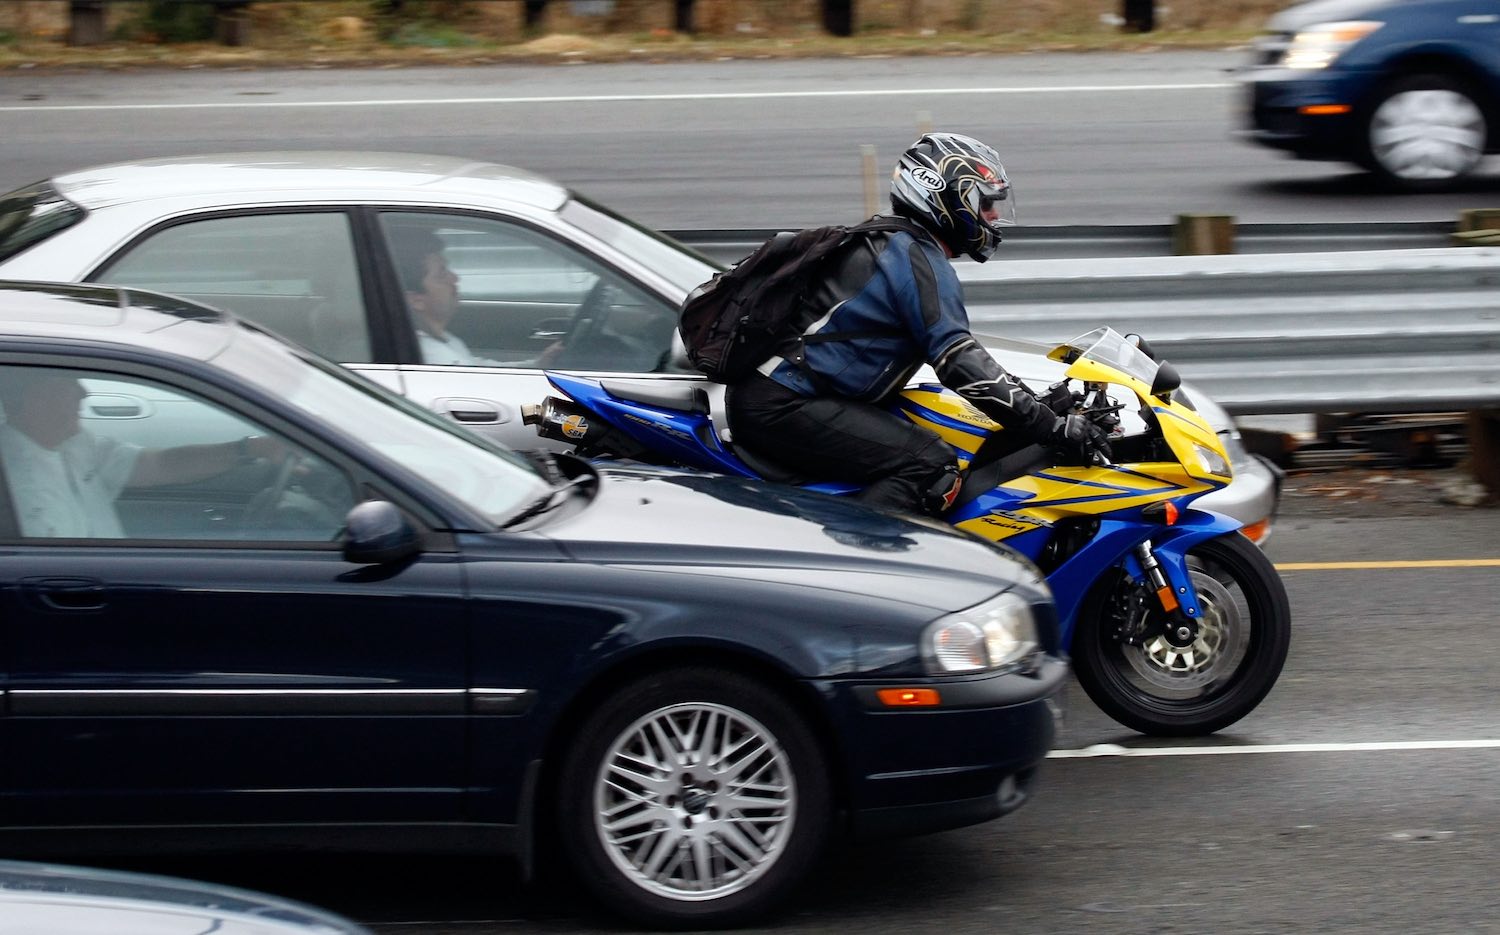 The profile view of a motorcyclist riding between a BMW and another sedan as it splits lanes.